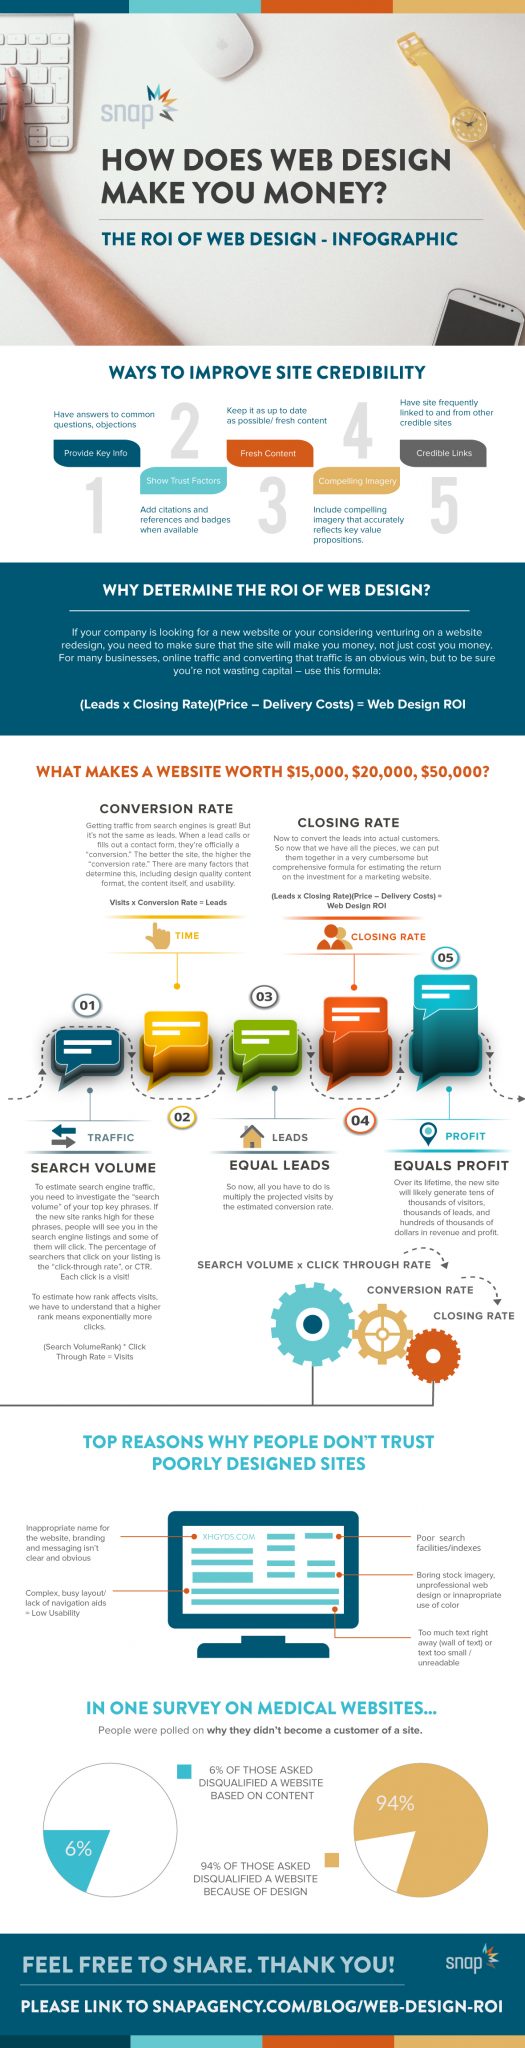 The ROI of Web Design Infographic